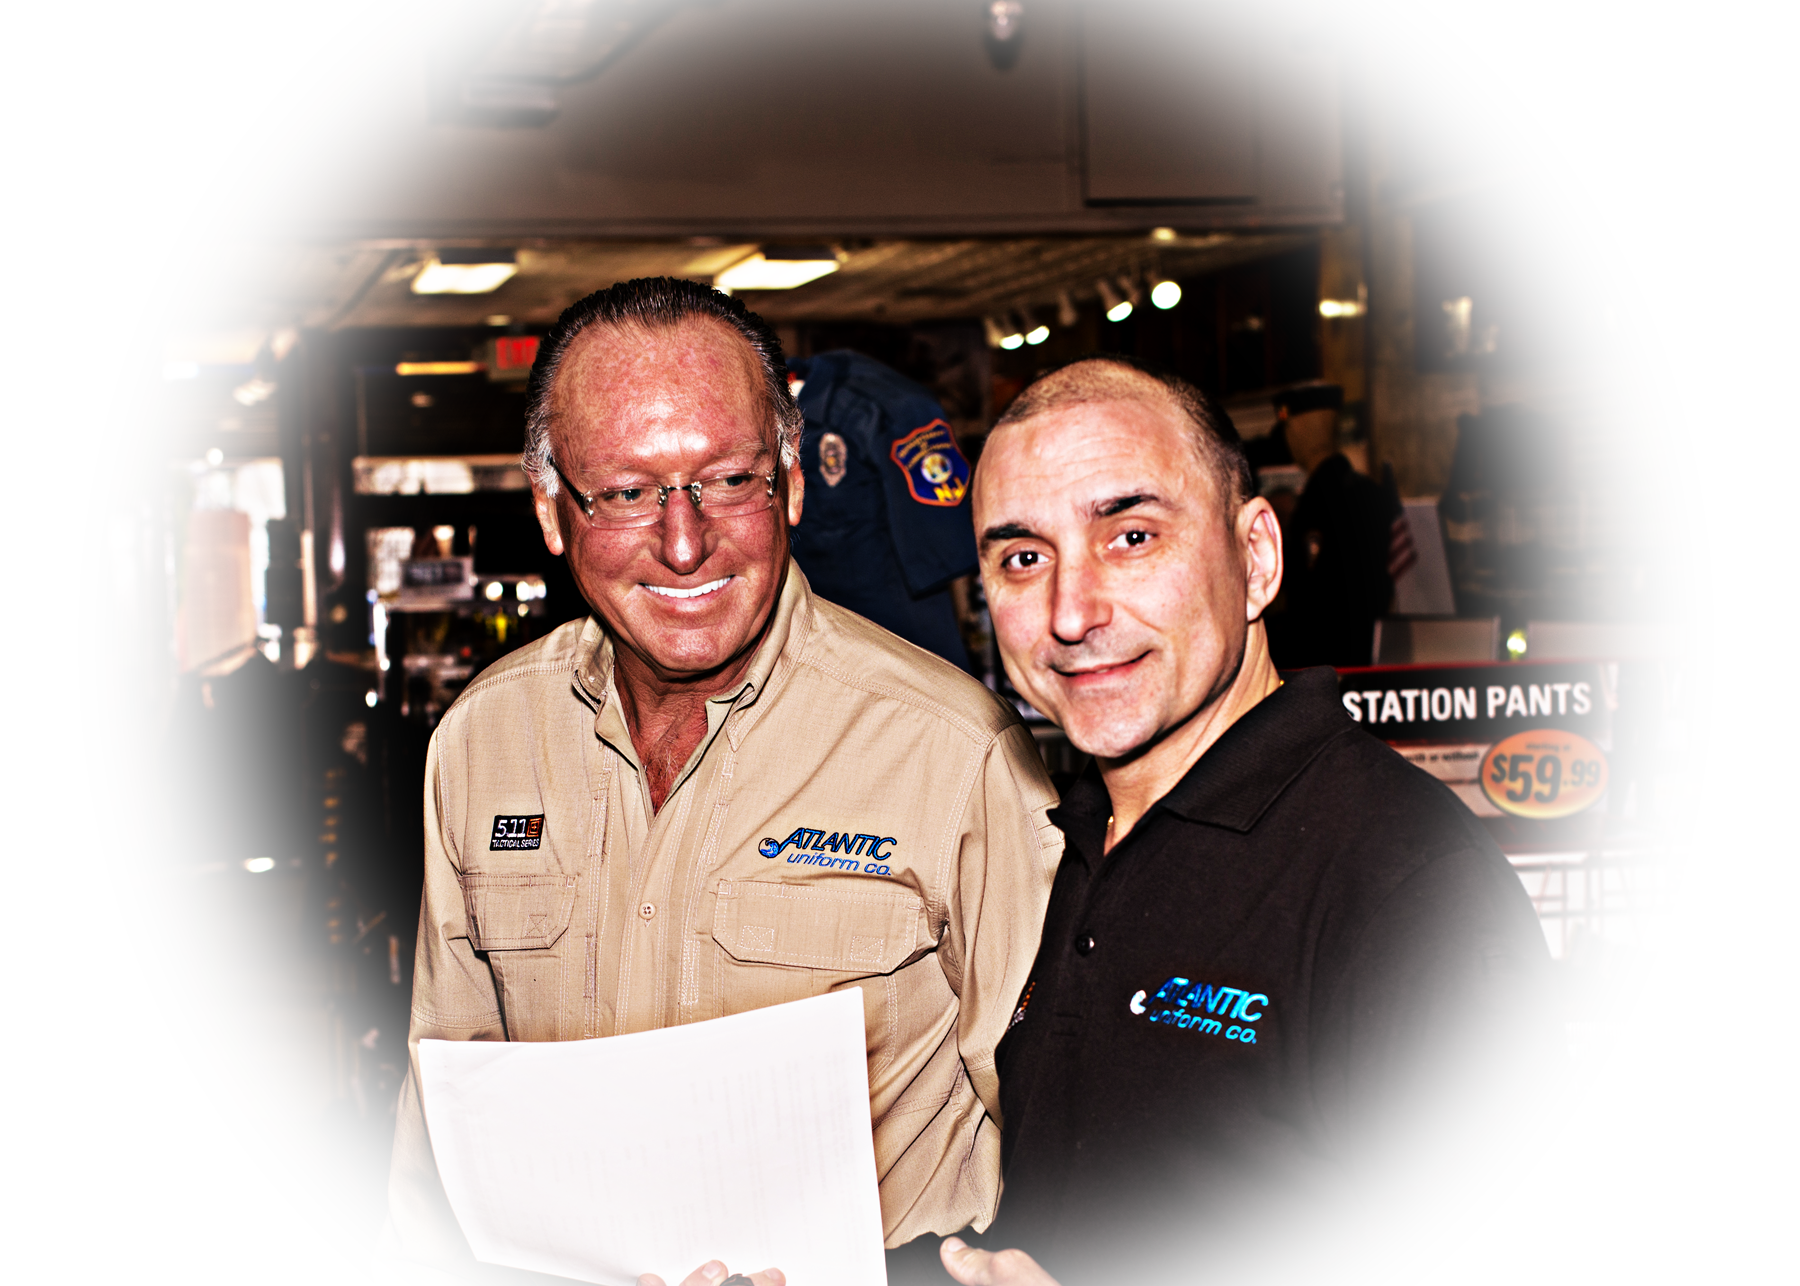 Two Product Specialists from Atlantic Uniform